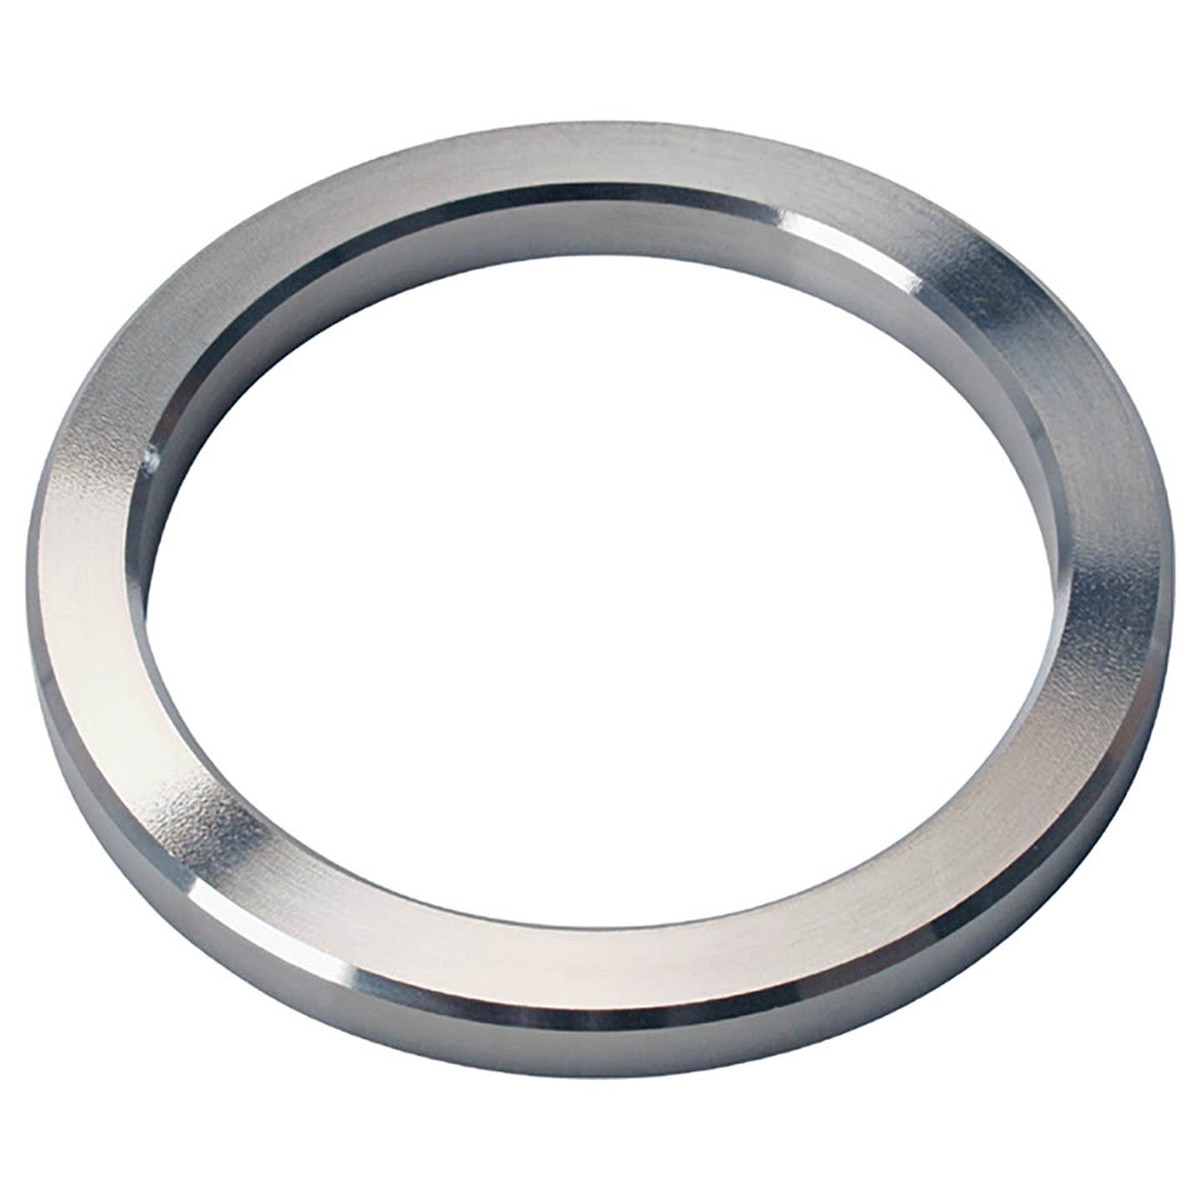 Barlow Tyrie Parasol Parasol Hole Reducer Ring 61mm - stainless steel  